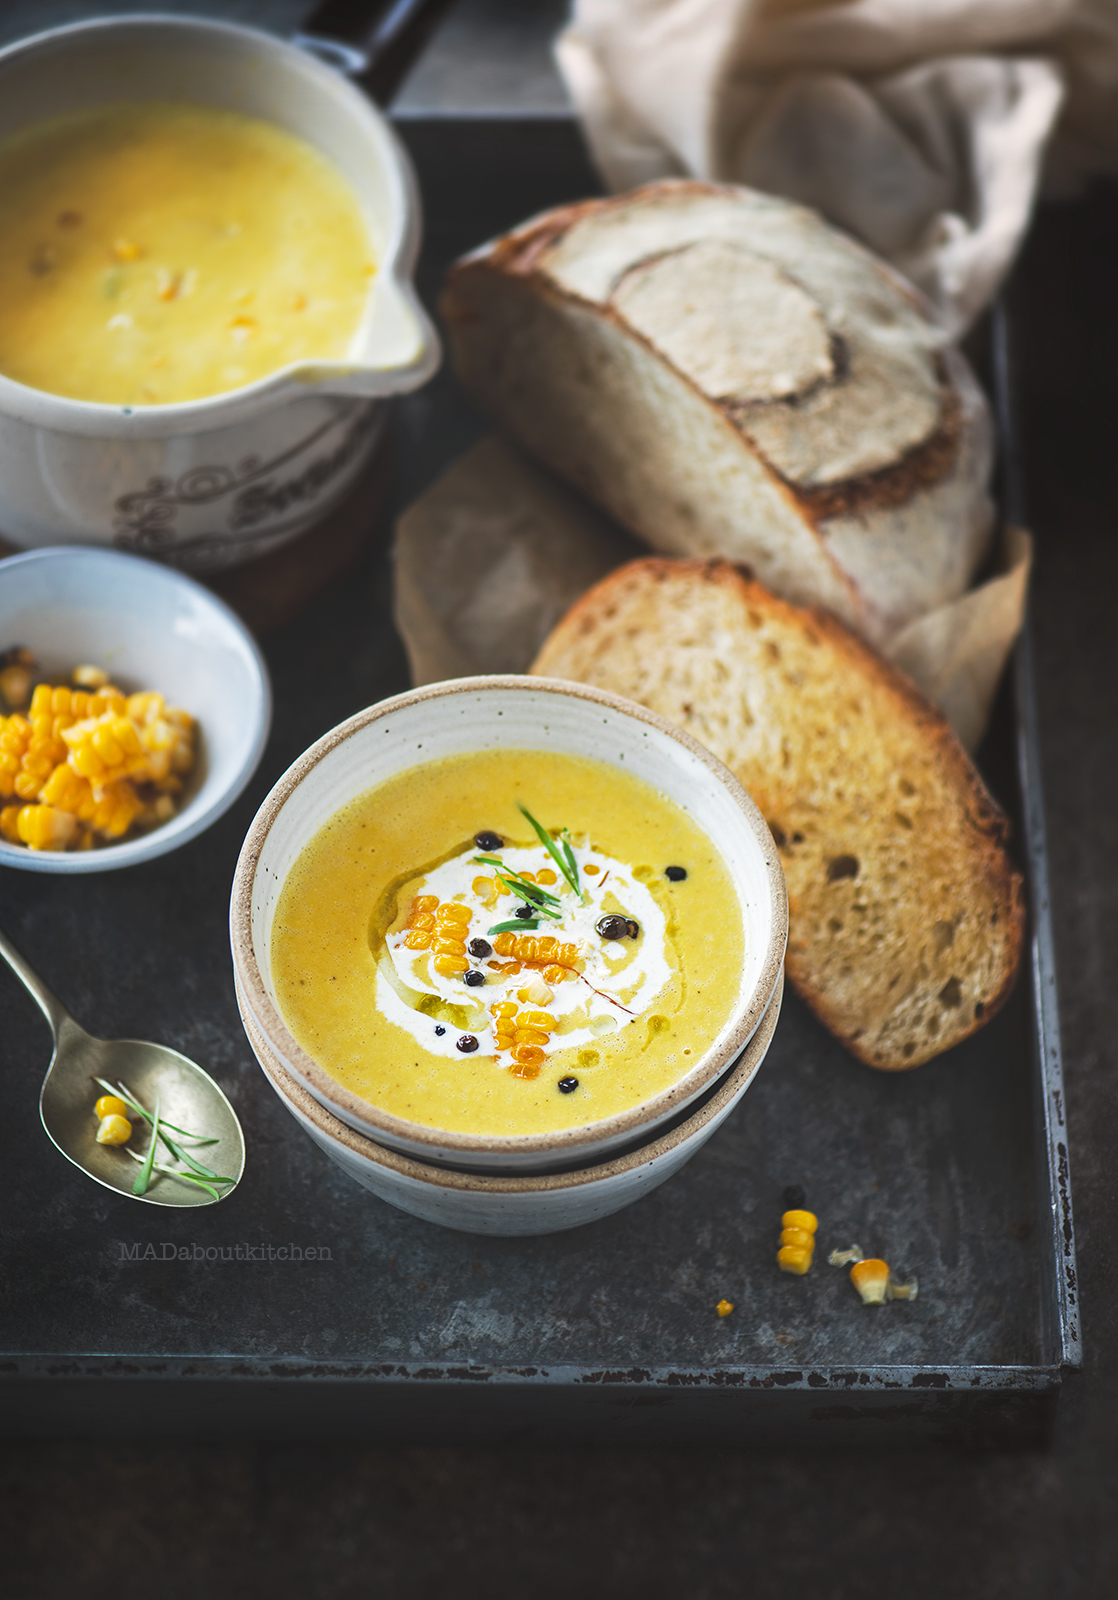 Corn soup is a creamy, light soup that is flavoured using garlic, rosemary and is served with a slice of crusty sourdough bread.